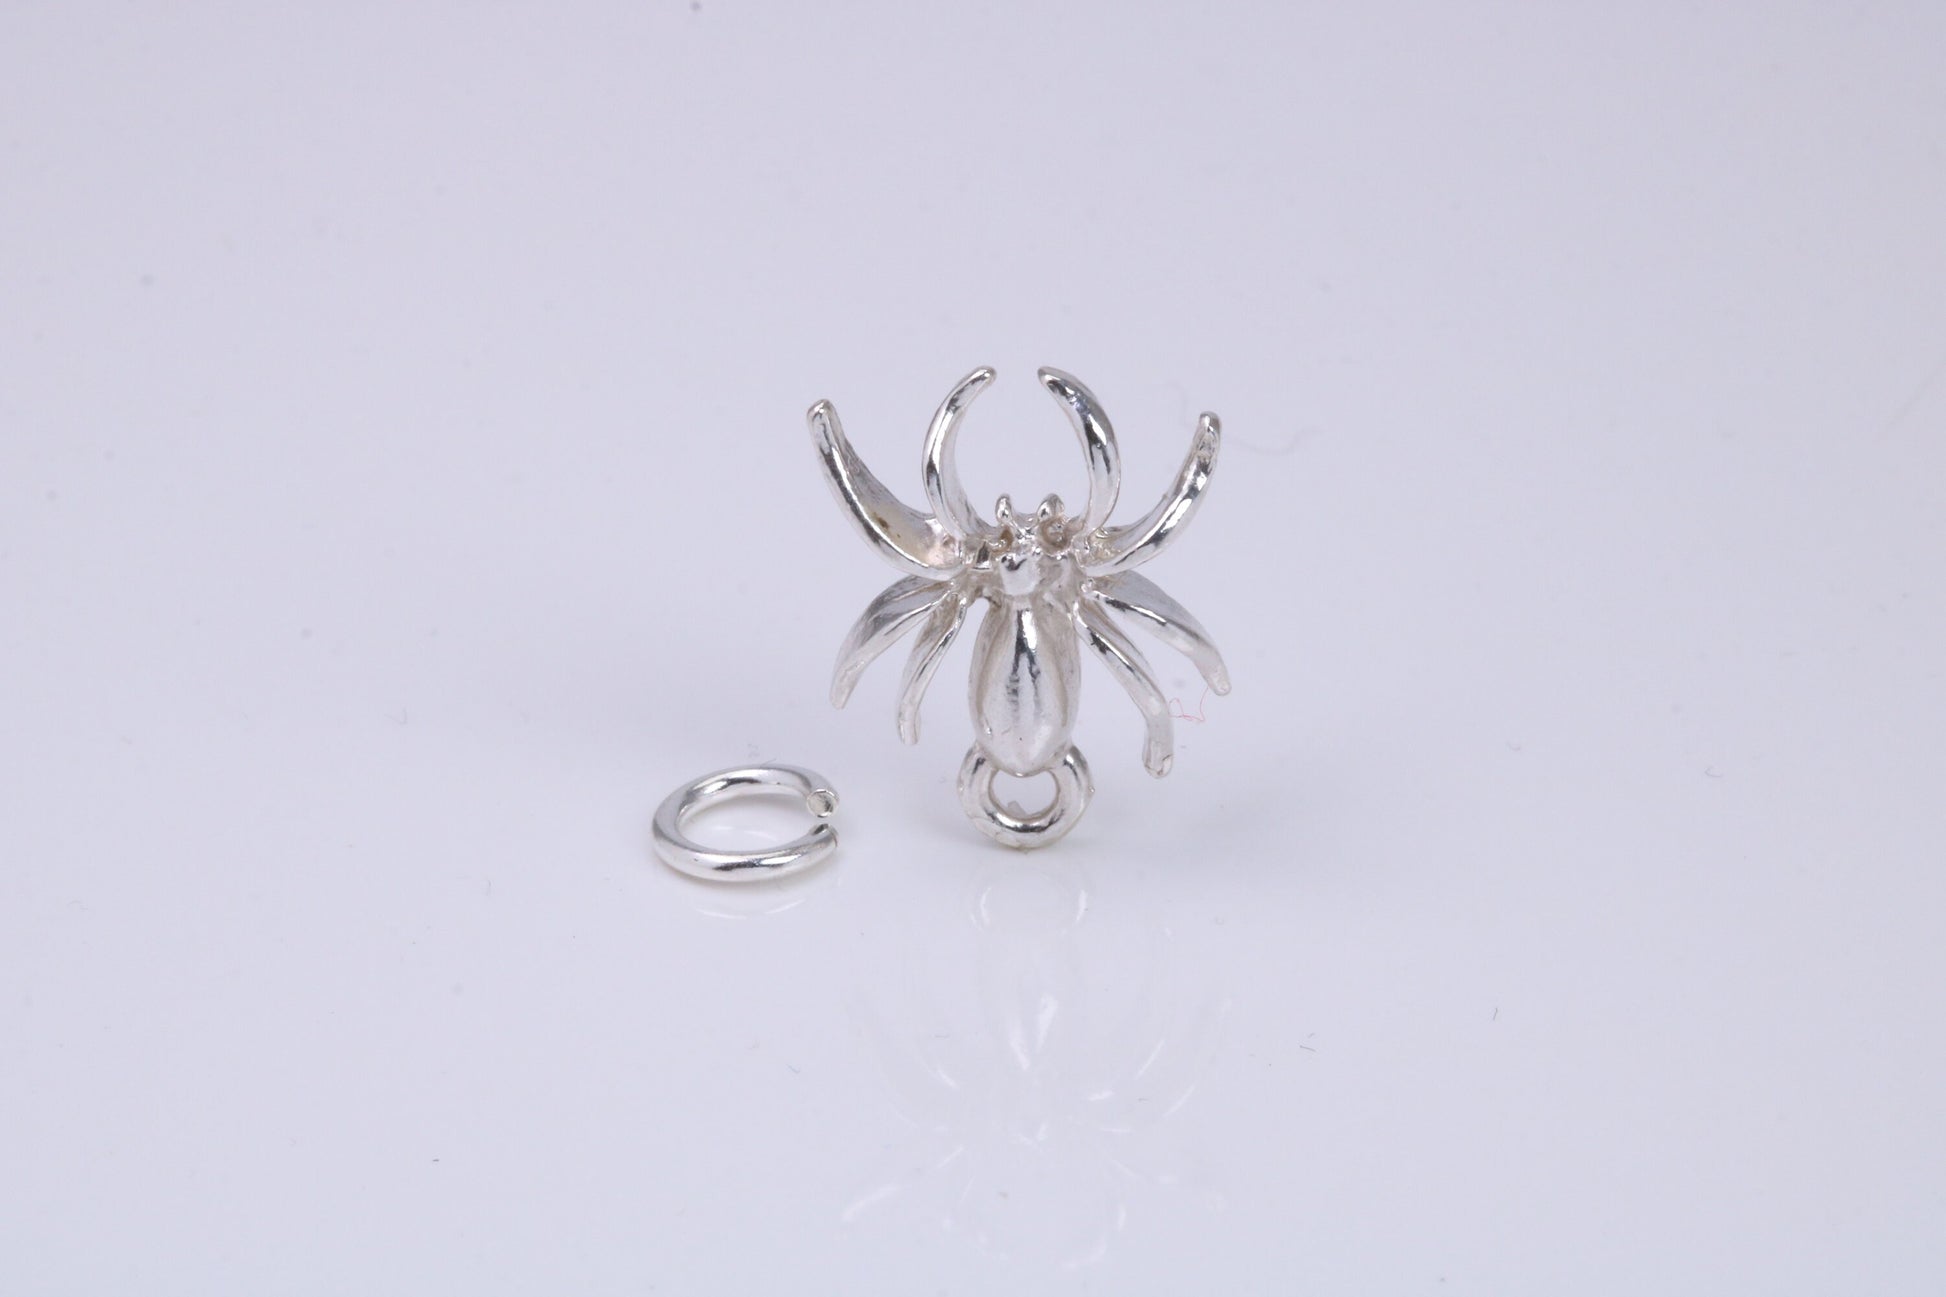 Spider Charm, Traditional Charm, Made from Solid 925 Grade Sterling Silver, Complete with Attachment Link